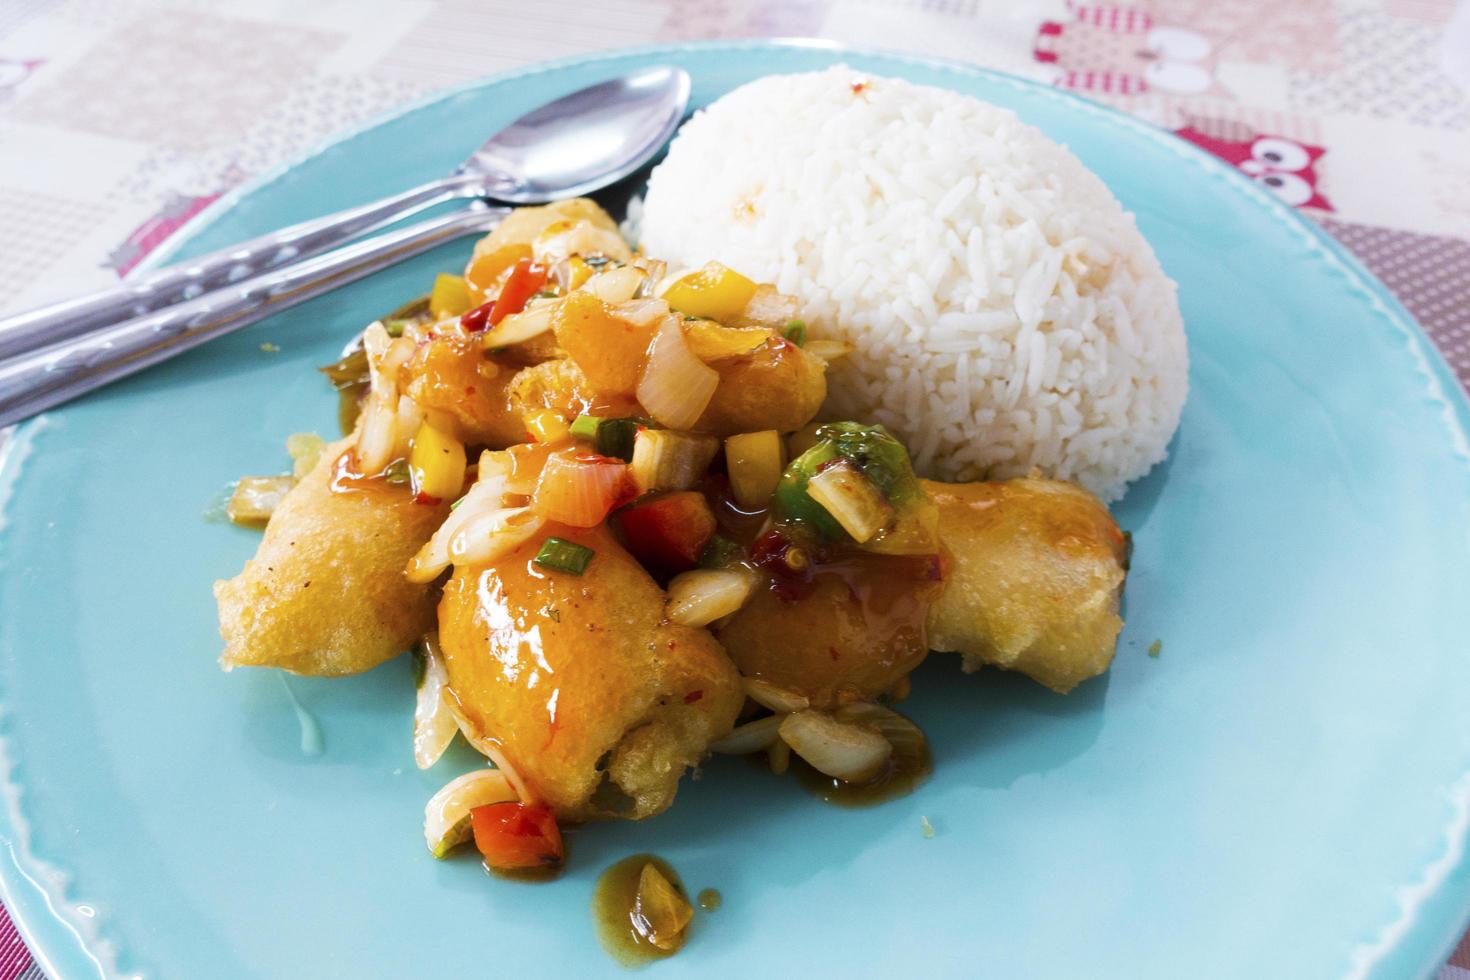 Rice with fried fish in sweet and sour sauce photo